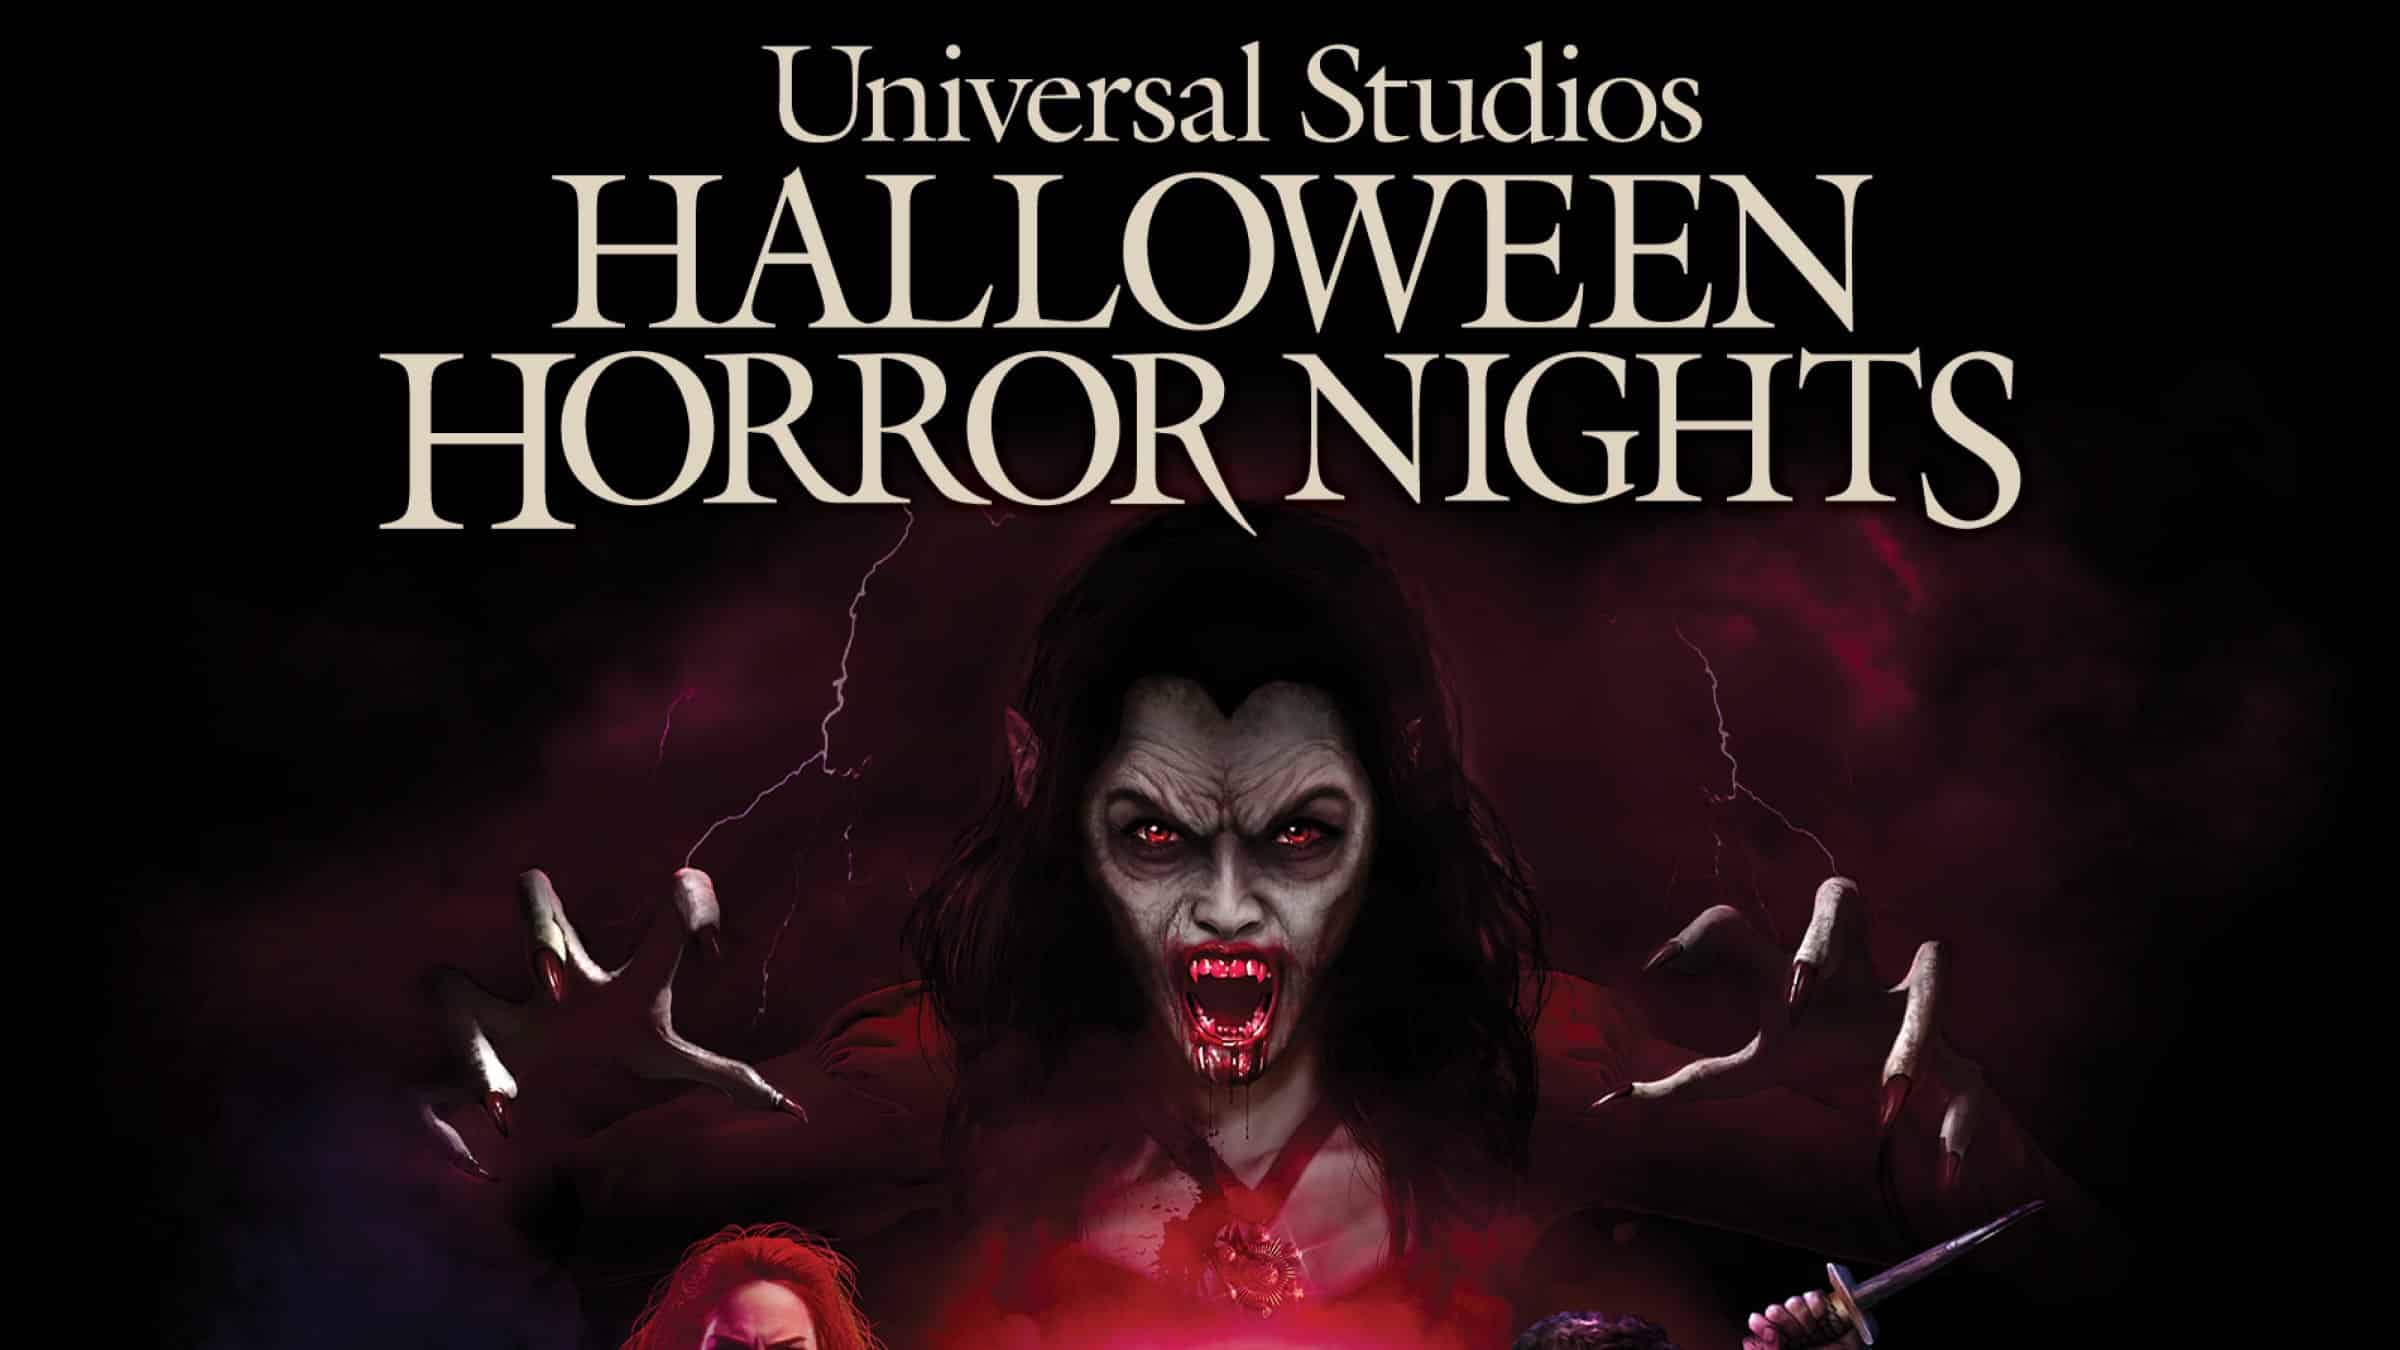 Universal Studios Halloween Horror Nights Announces an All-Female Classic Universal Monsters Haunted House for 2024